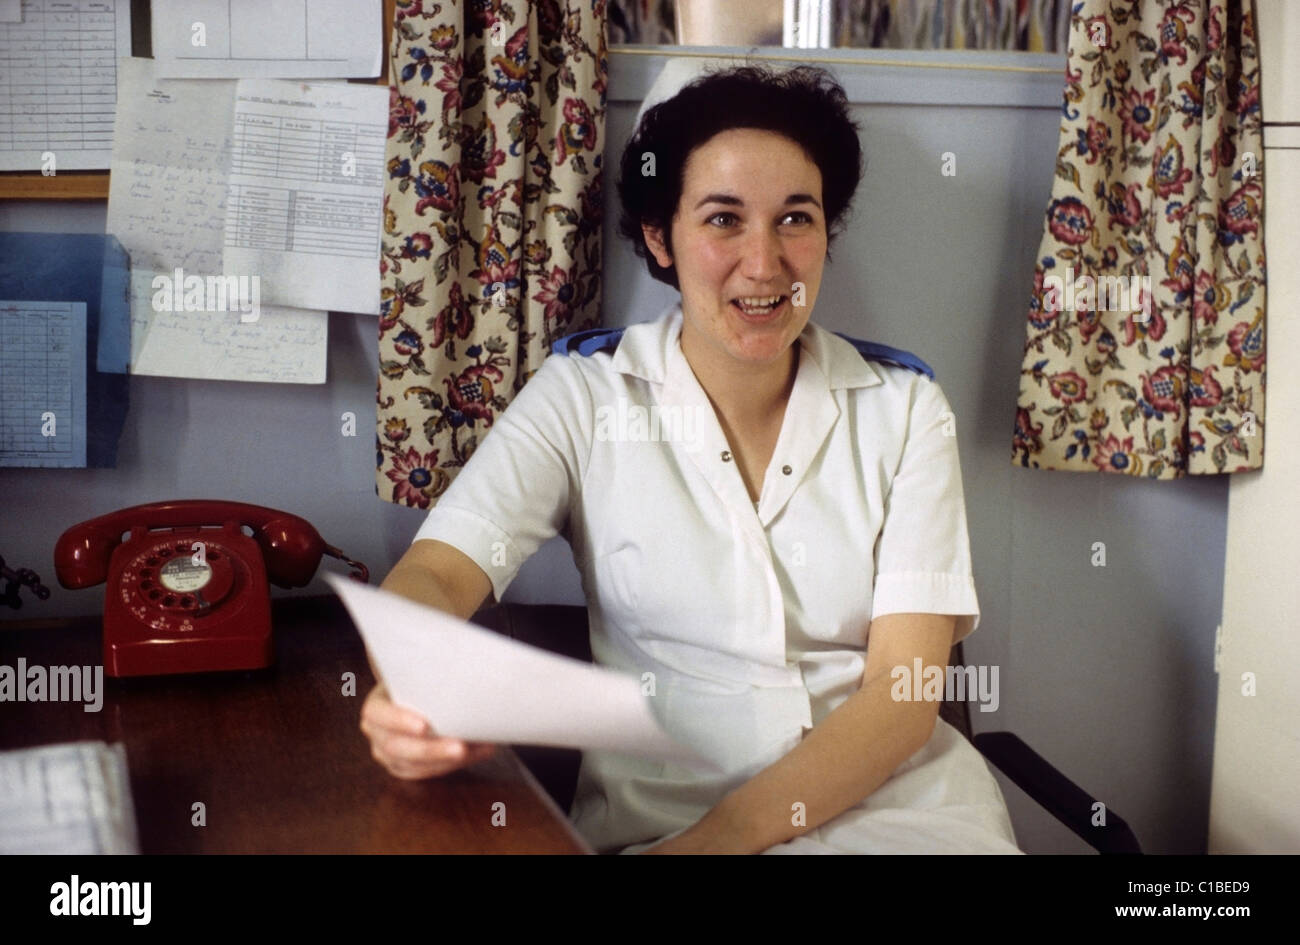 A young NHS nurse smiling in a white uniform sitting at a desk next to a red telephone holding a letter in a hospital administration office in the 1970s 1980s in Bronglais hospital Aberystwyth Wales UK   KATHY DEWITT Stock Photo